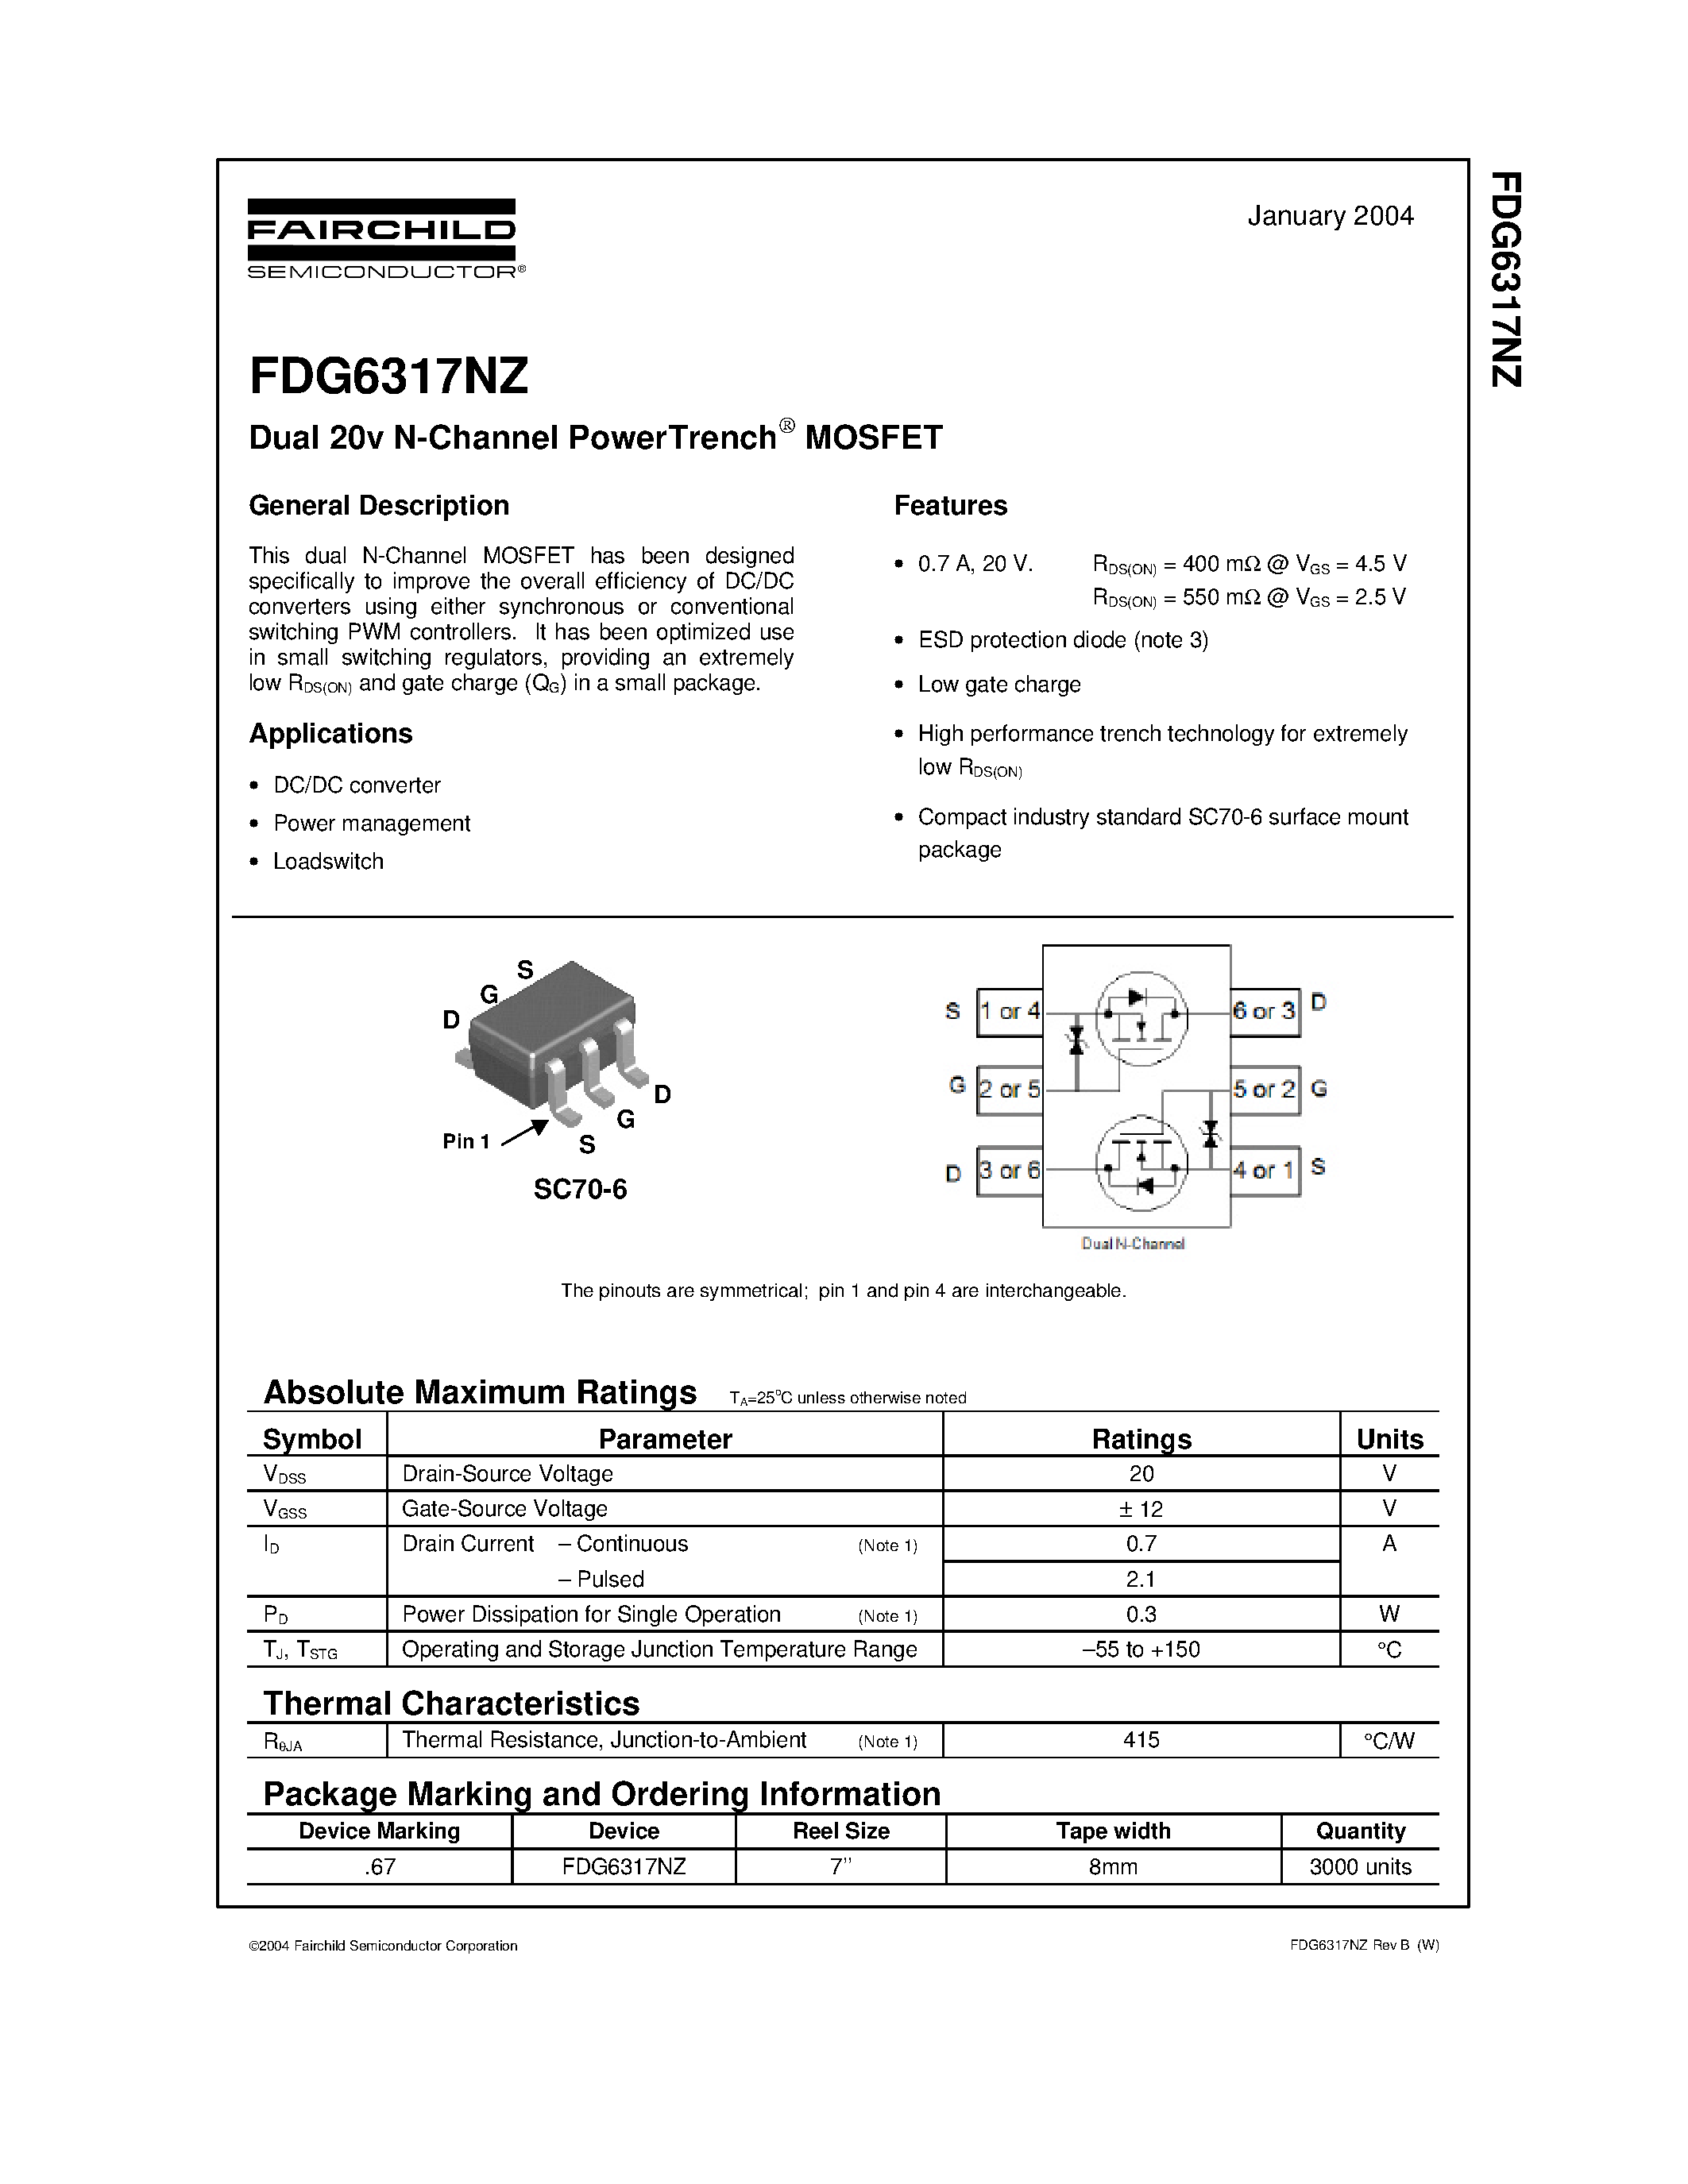 Даташит FDG6317NZ-Dual 20v N-Channel PowerTrench MOSFET страница 1